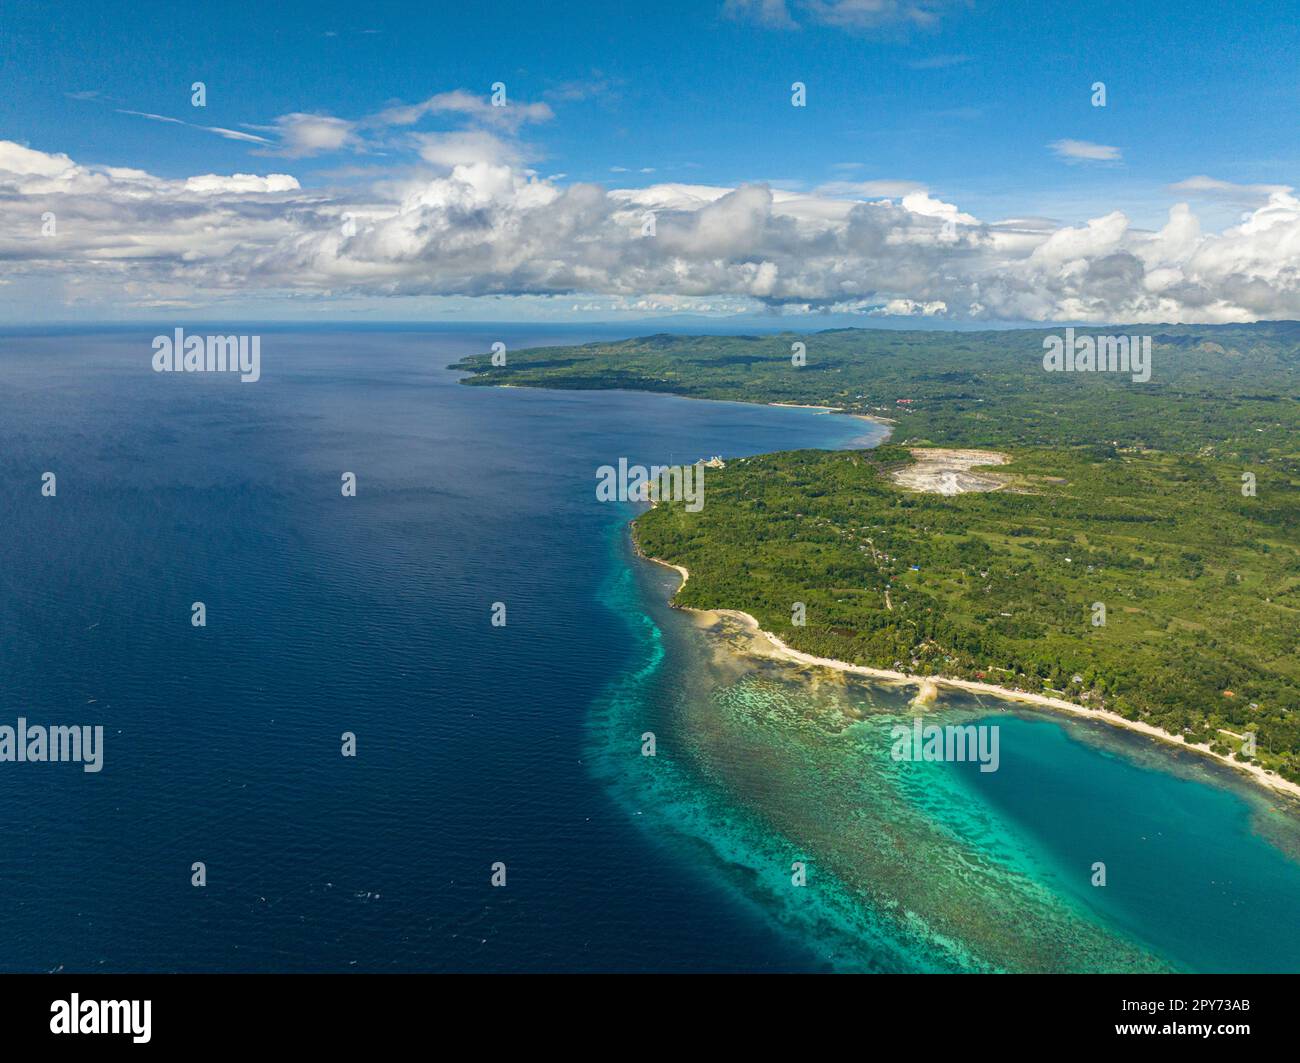 Beautiful blue ocean and green trees in aerial view. Siquijor, Philippines. Stock Photo